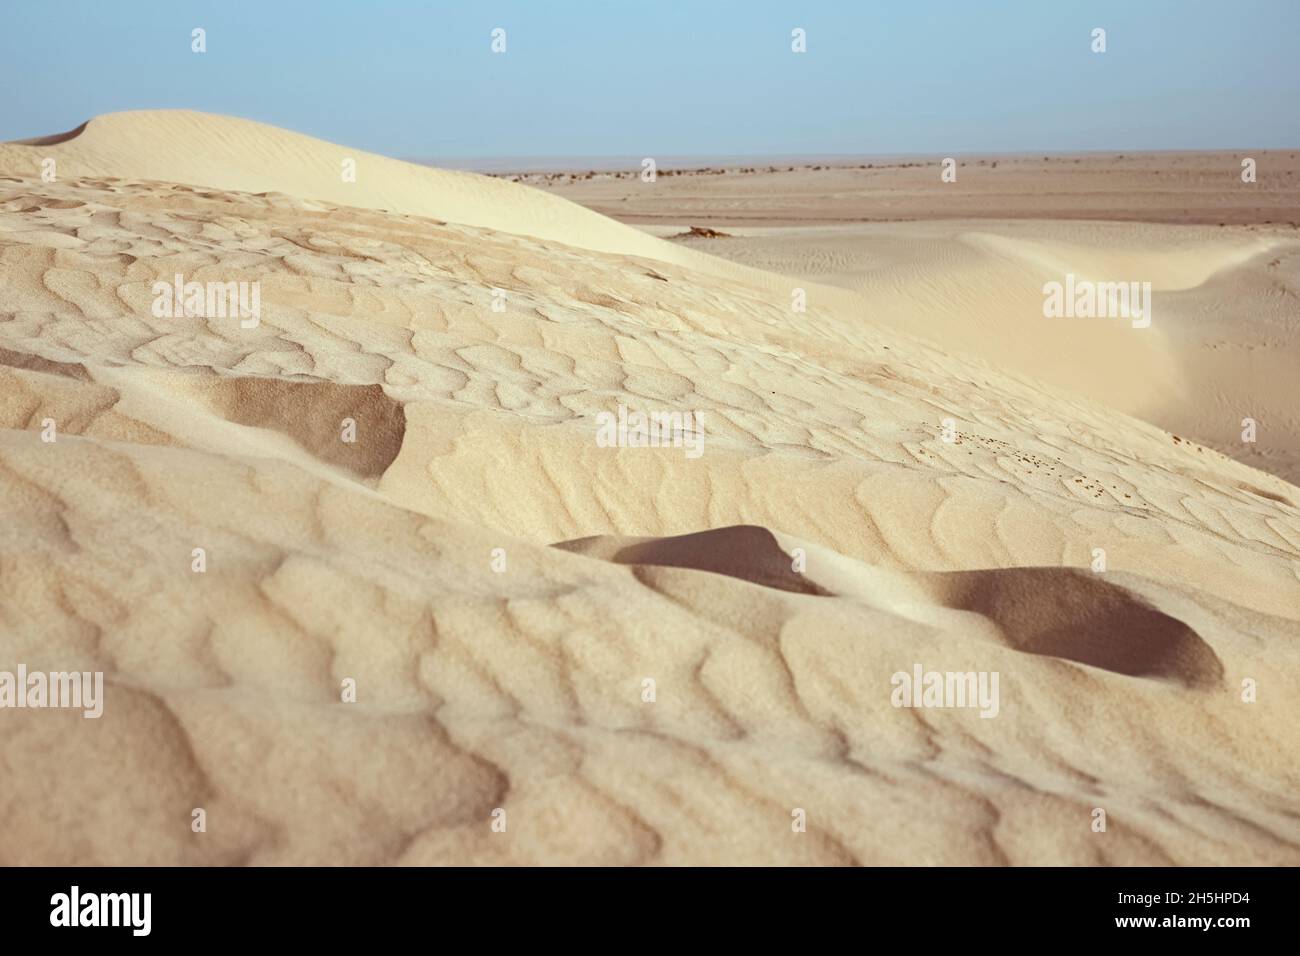 Lonely sand dunes in a strong wind under the sky against the background of arid desert Stock Photo